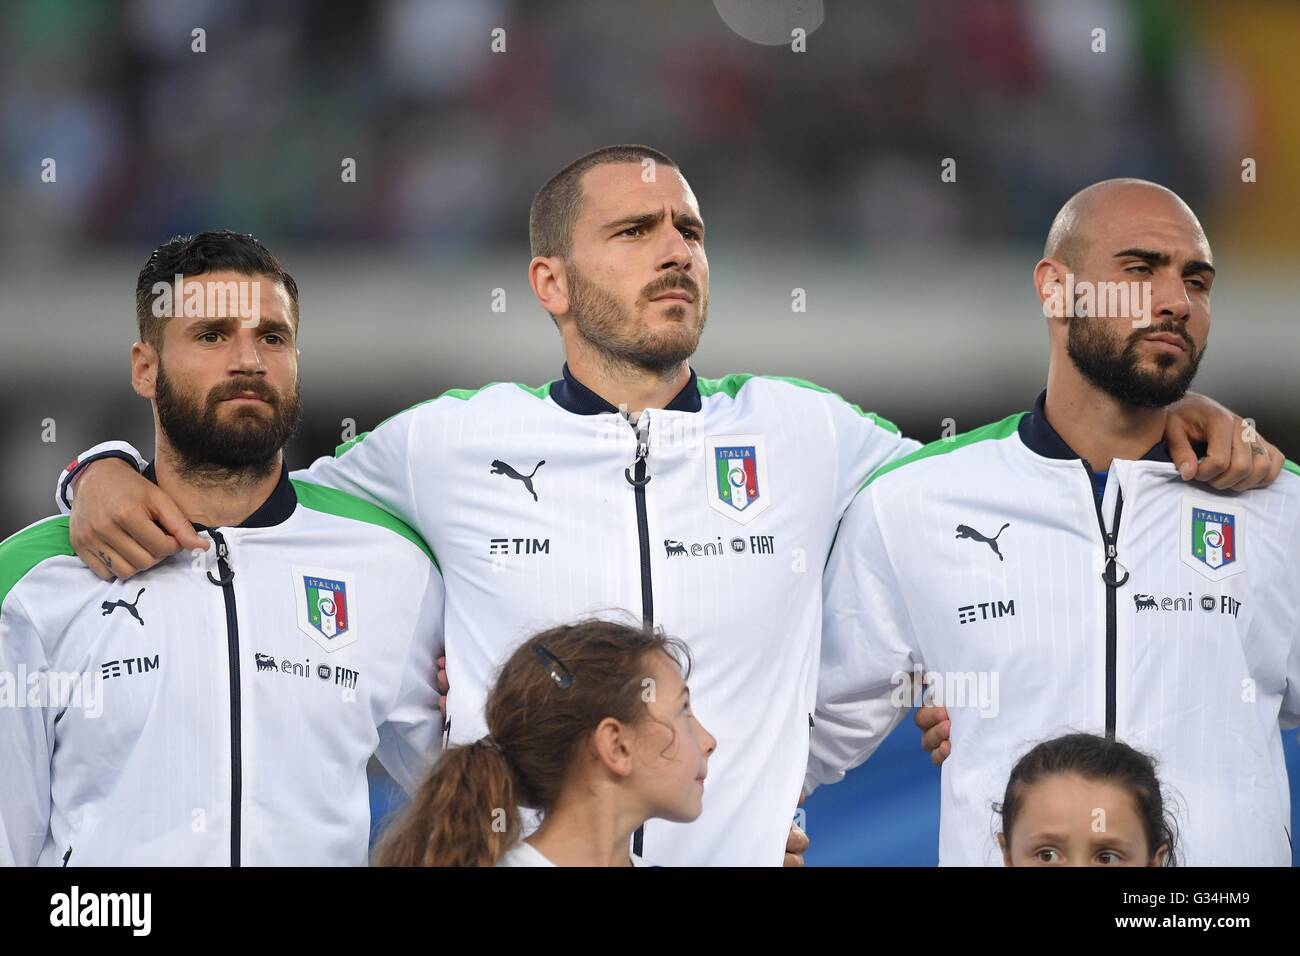 Verona, Italy. 6th June, 2016. International friendly match between Italy and Finland national teams played in Stadio Marc`Antonio Bentegodi, Verona Italy. The match, which Italy won with a 2-0 score, was part of their preparation for the Euro 2016. Antonio Candreva (27’ penalty kick) and Daniele de Rossi (71’) scored the goals Stock Photo